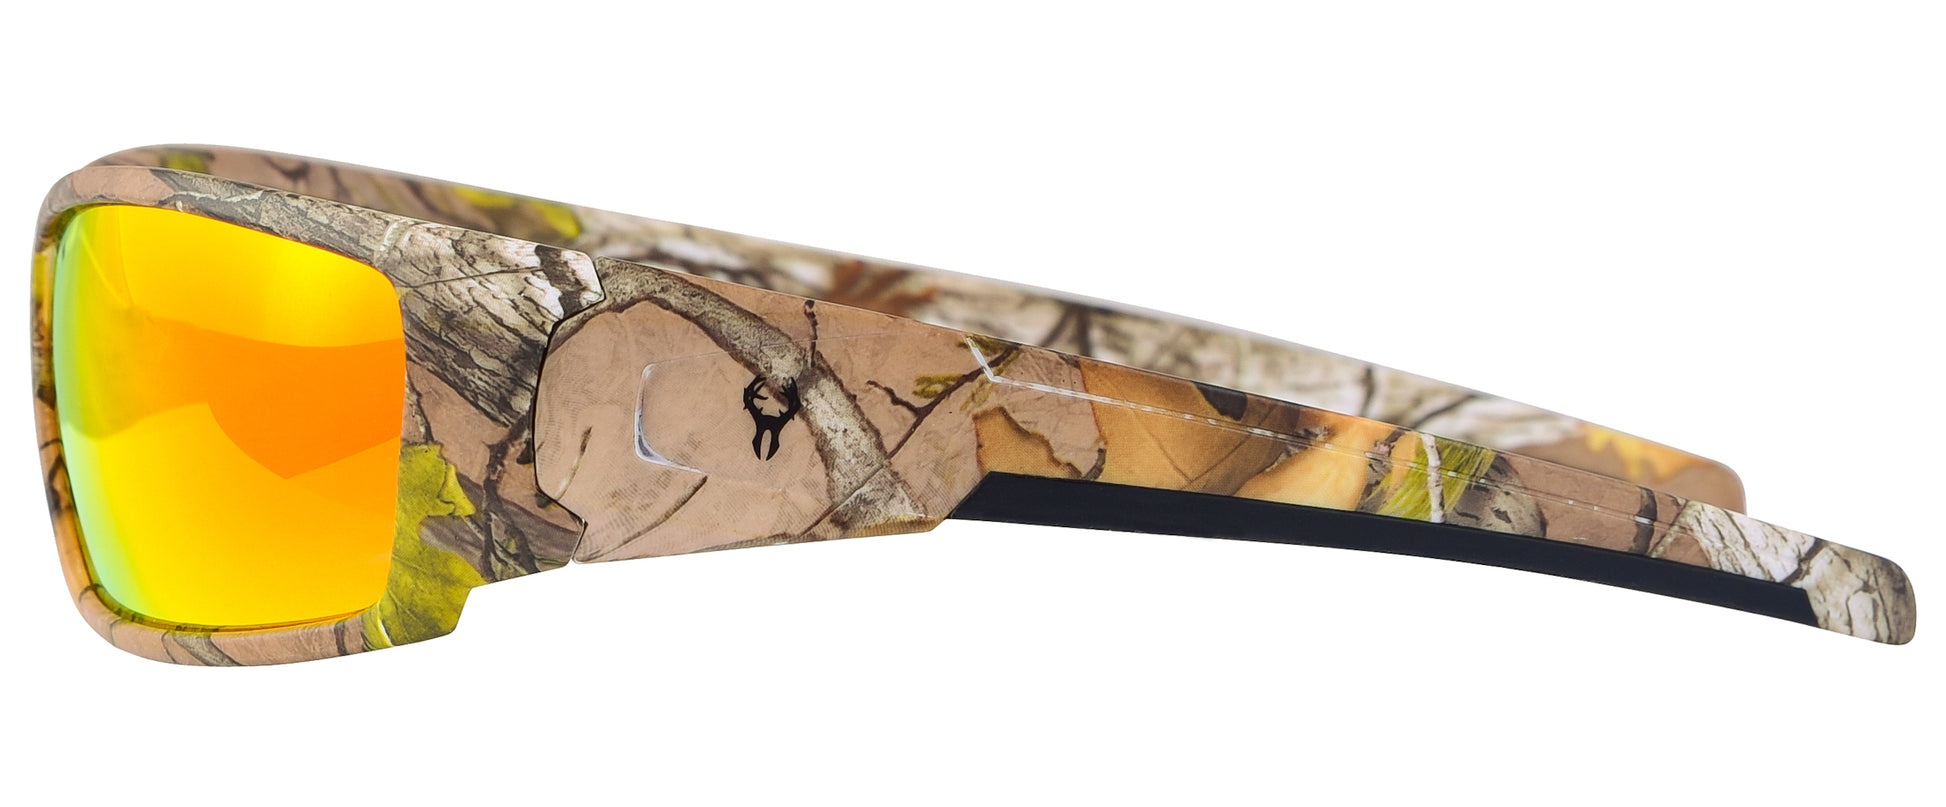 Second image: Hornz Brown Forest Camouflage Polarized Sunglasses for Men - Aquabull - Free Matching Microfiber Pouch - Brown Camo Frame - Fire Orange Lens